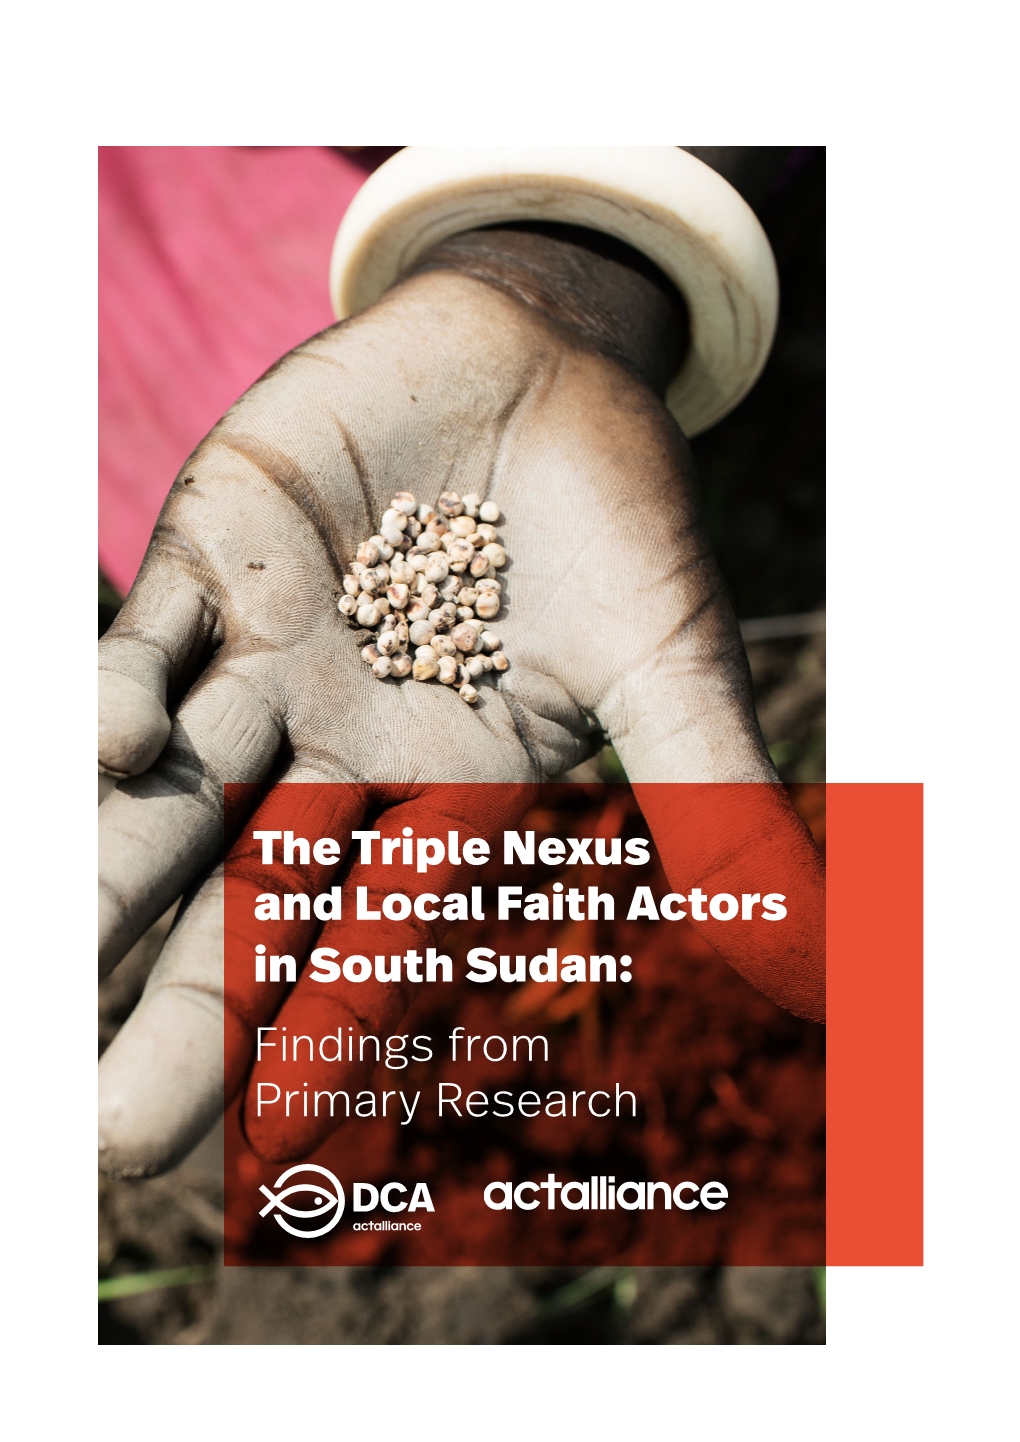 The Triple Nexus and Local Faith Actors in South Sudan: Findings from Primary Research Research Team: Dr